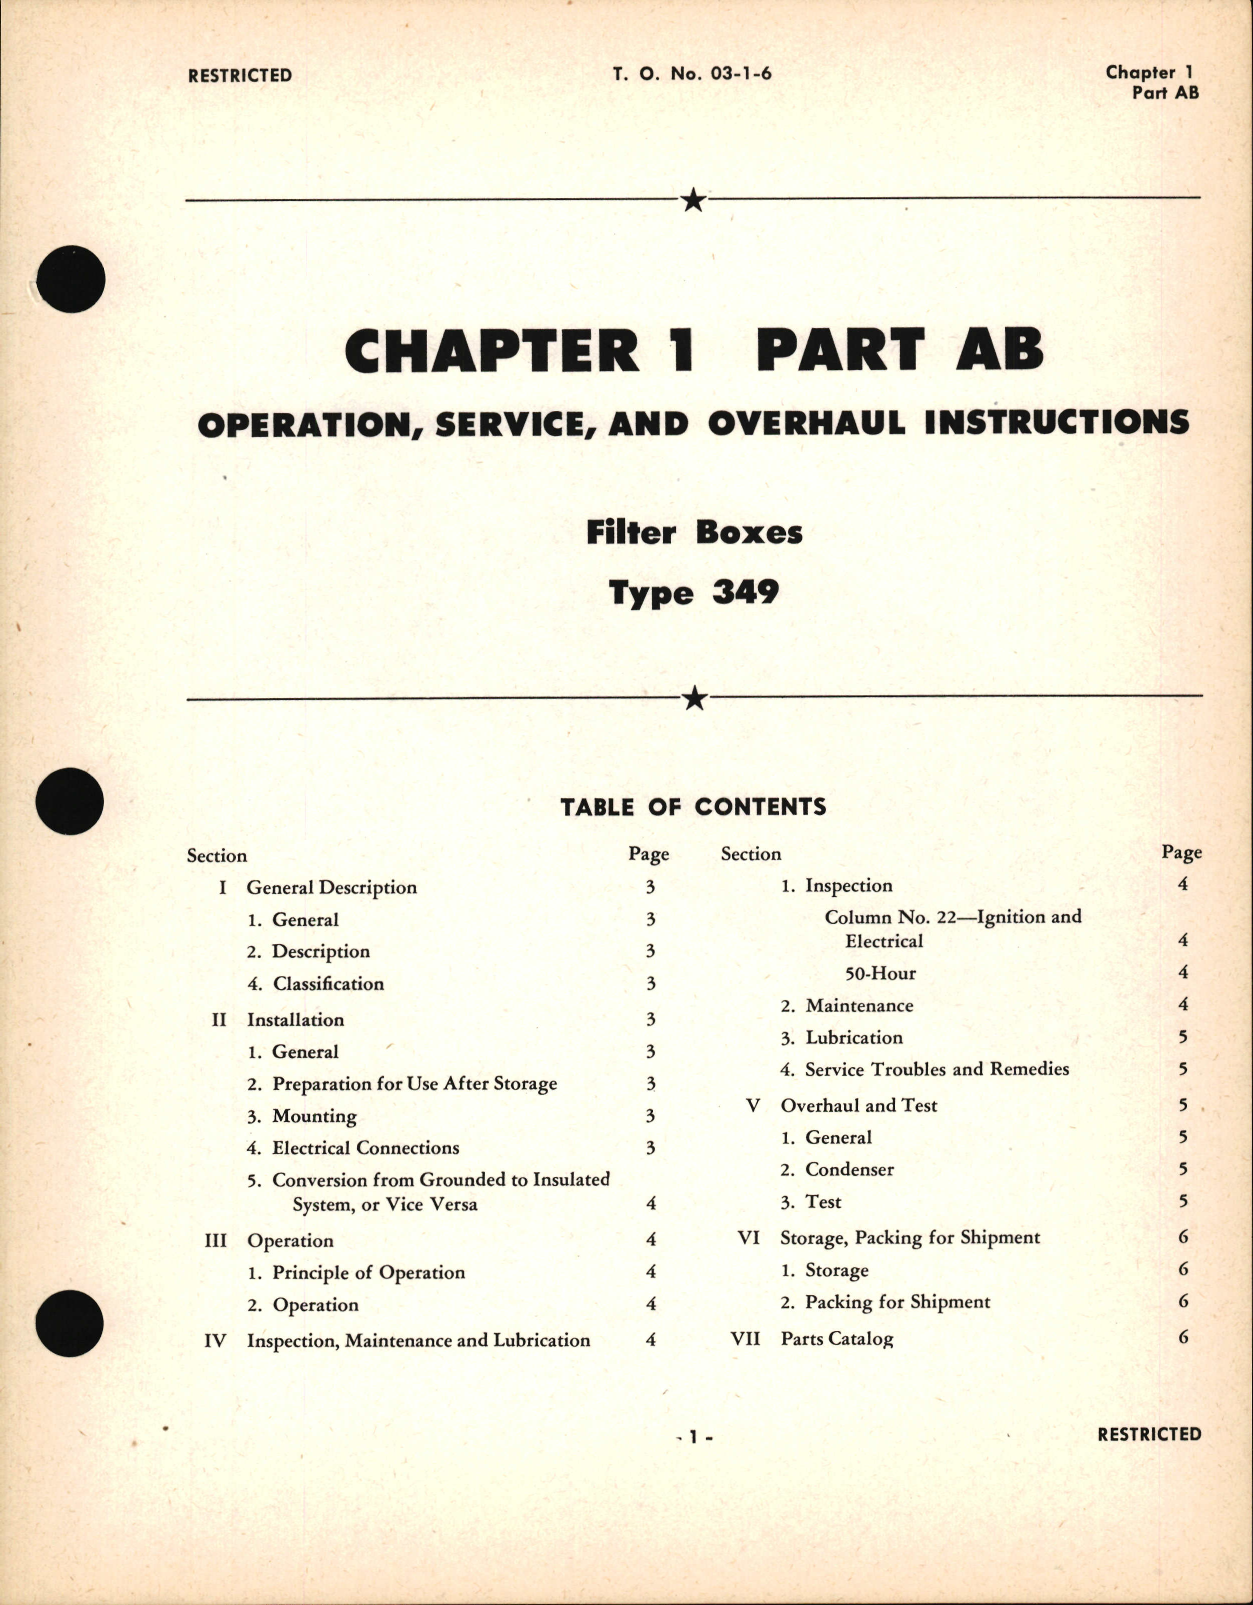 Sample page 1 from AirCorps Library document: Operation, Service & Overhaul Instructions for Filter Boxes, Type 349